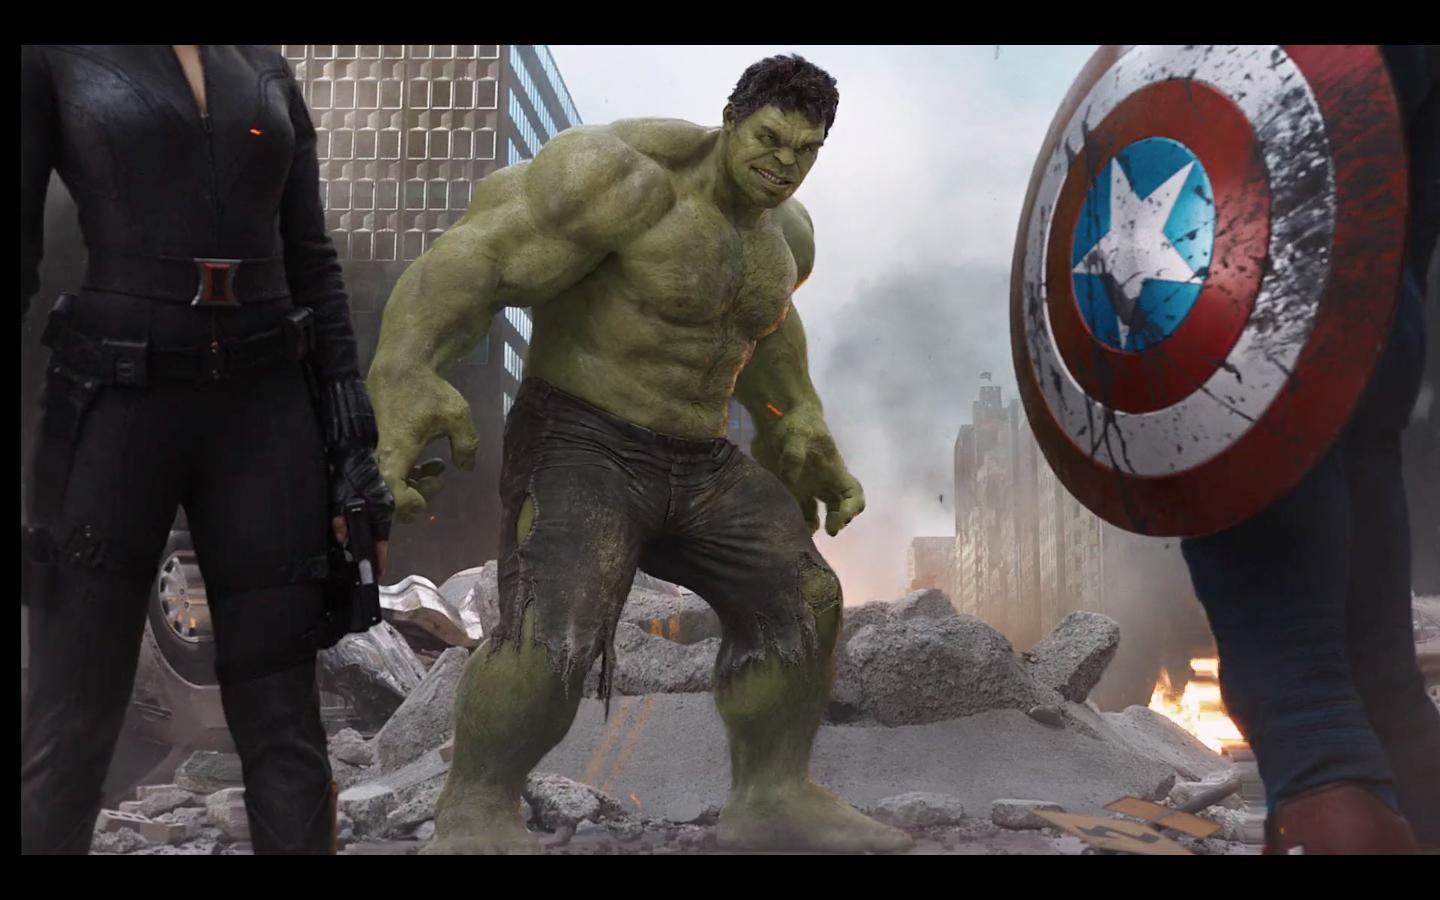 I paused Avengers and got a nice Hulk wallpaper (1440x900)